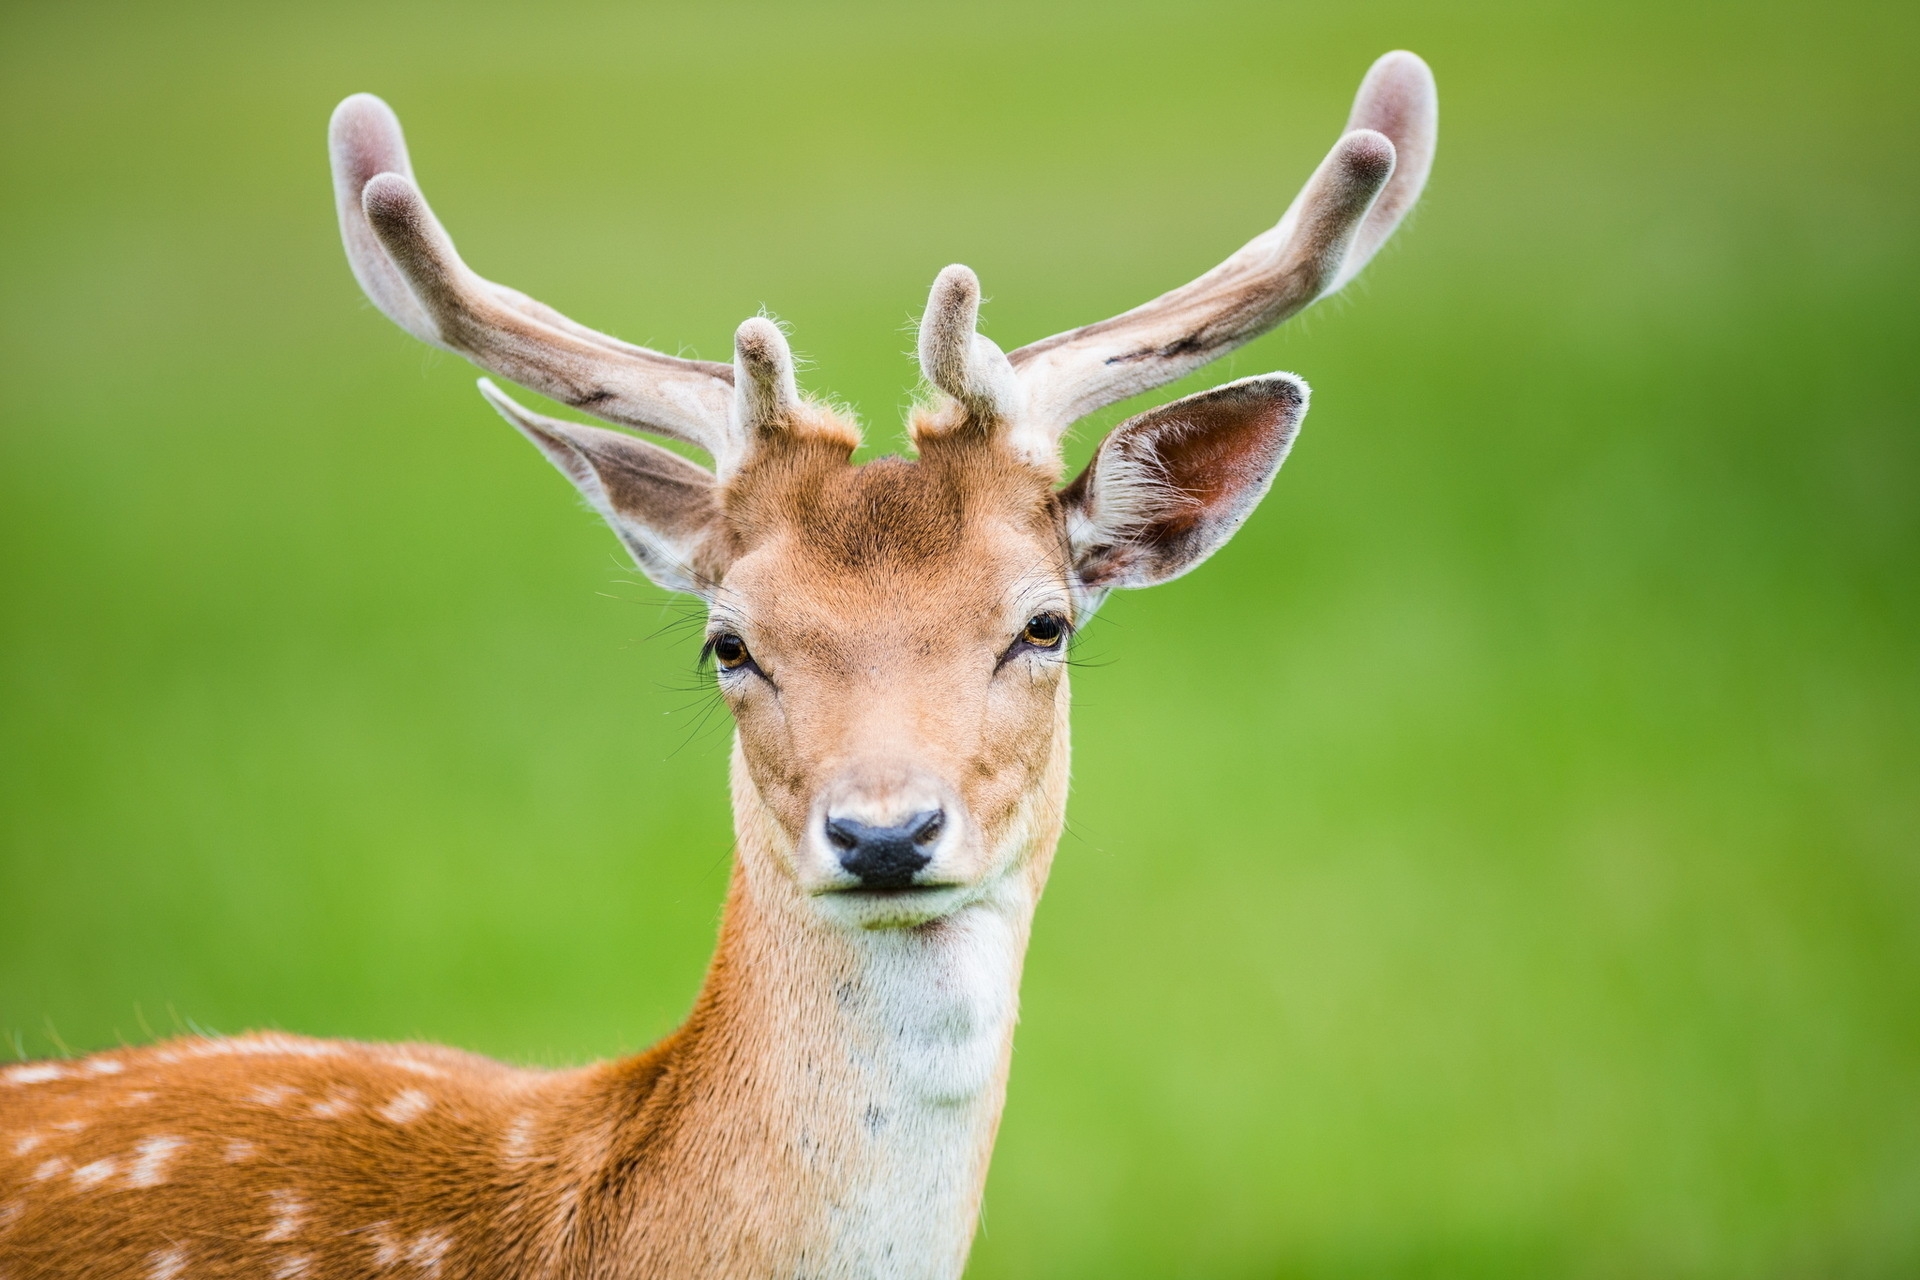 spotted, animals, spotty, deer, horns High Definition image